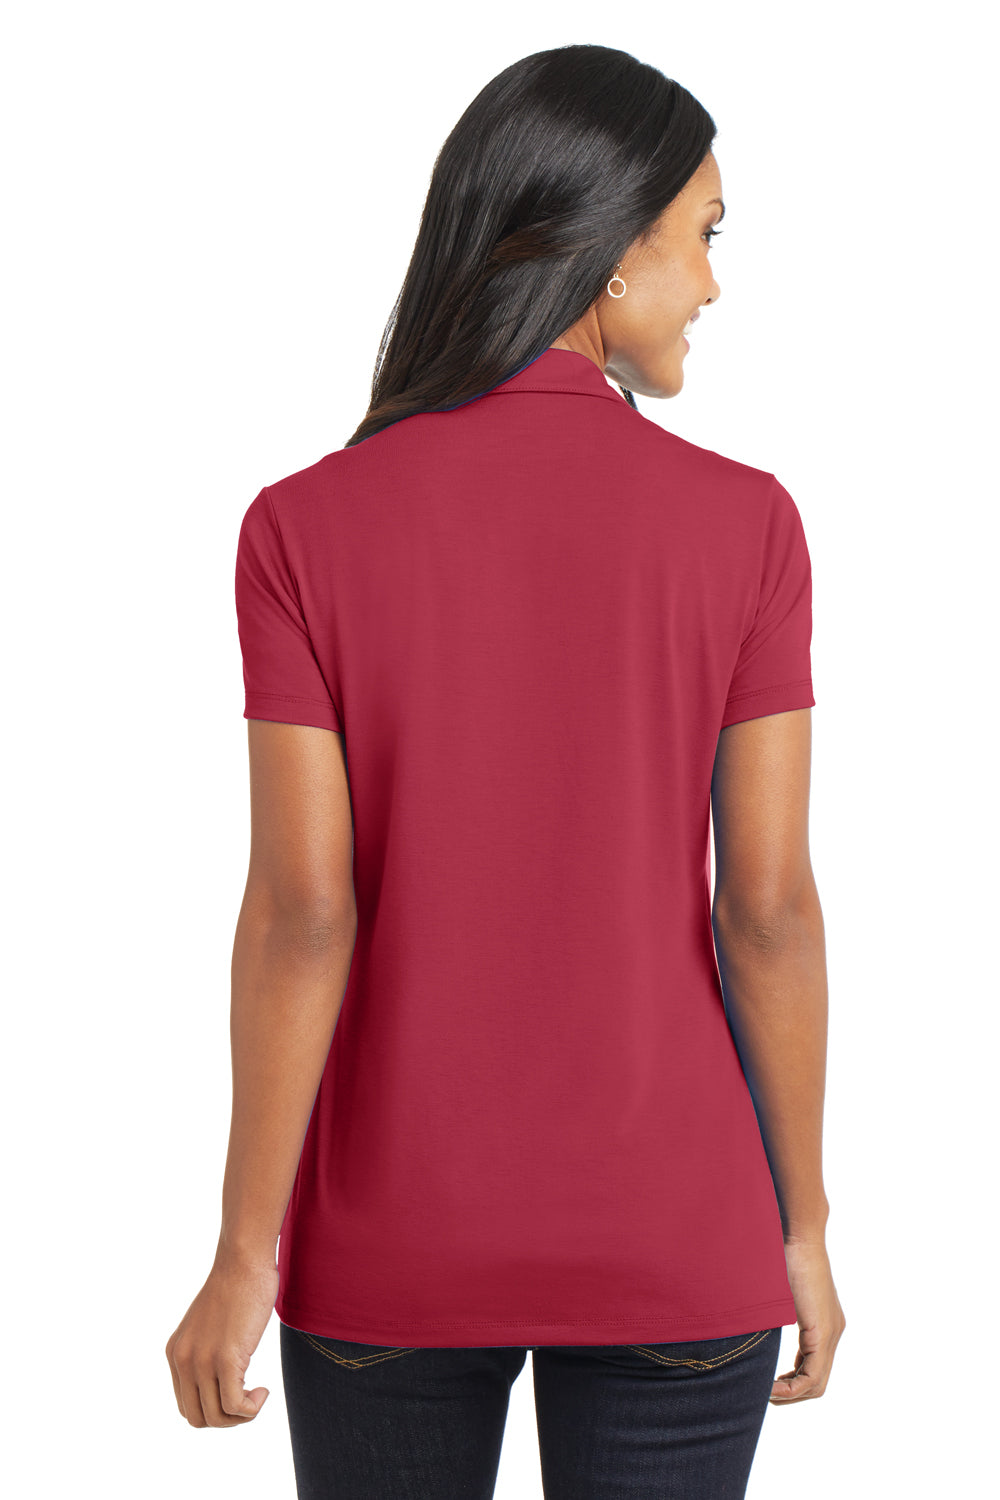 Port Authority L568 Womens Cotton Touch Performance Moisture Wicking Short Sleeve Polo Shirt Red Back